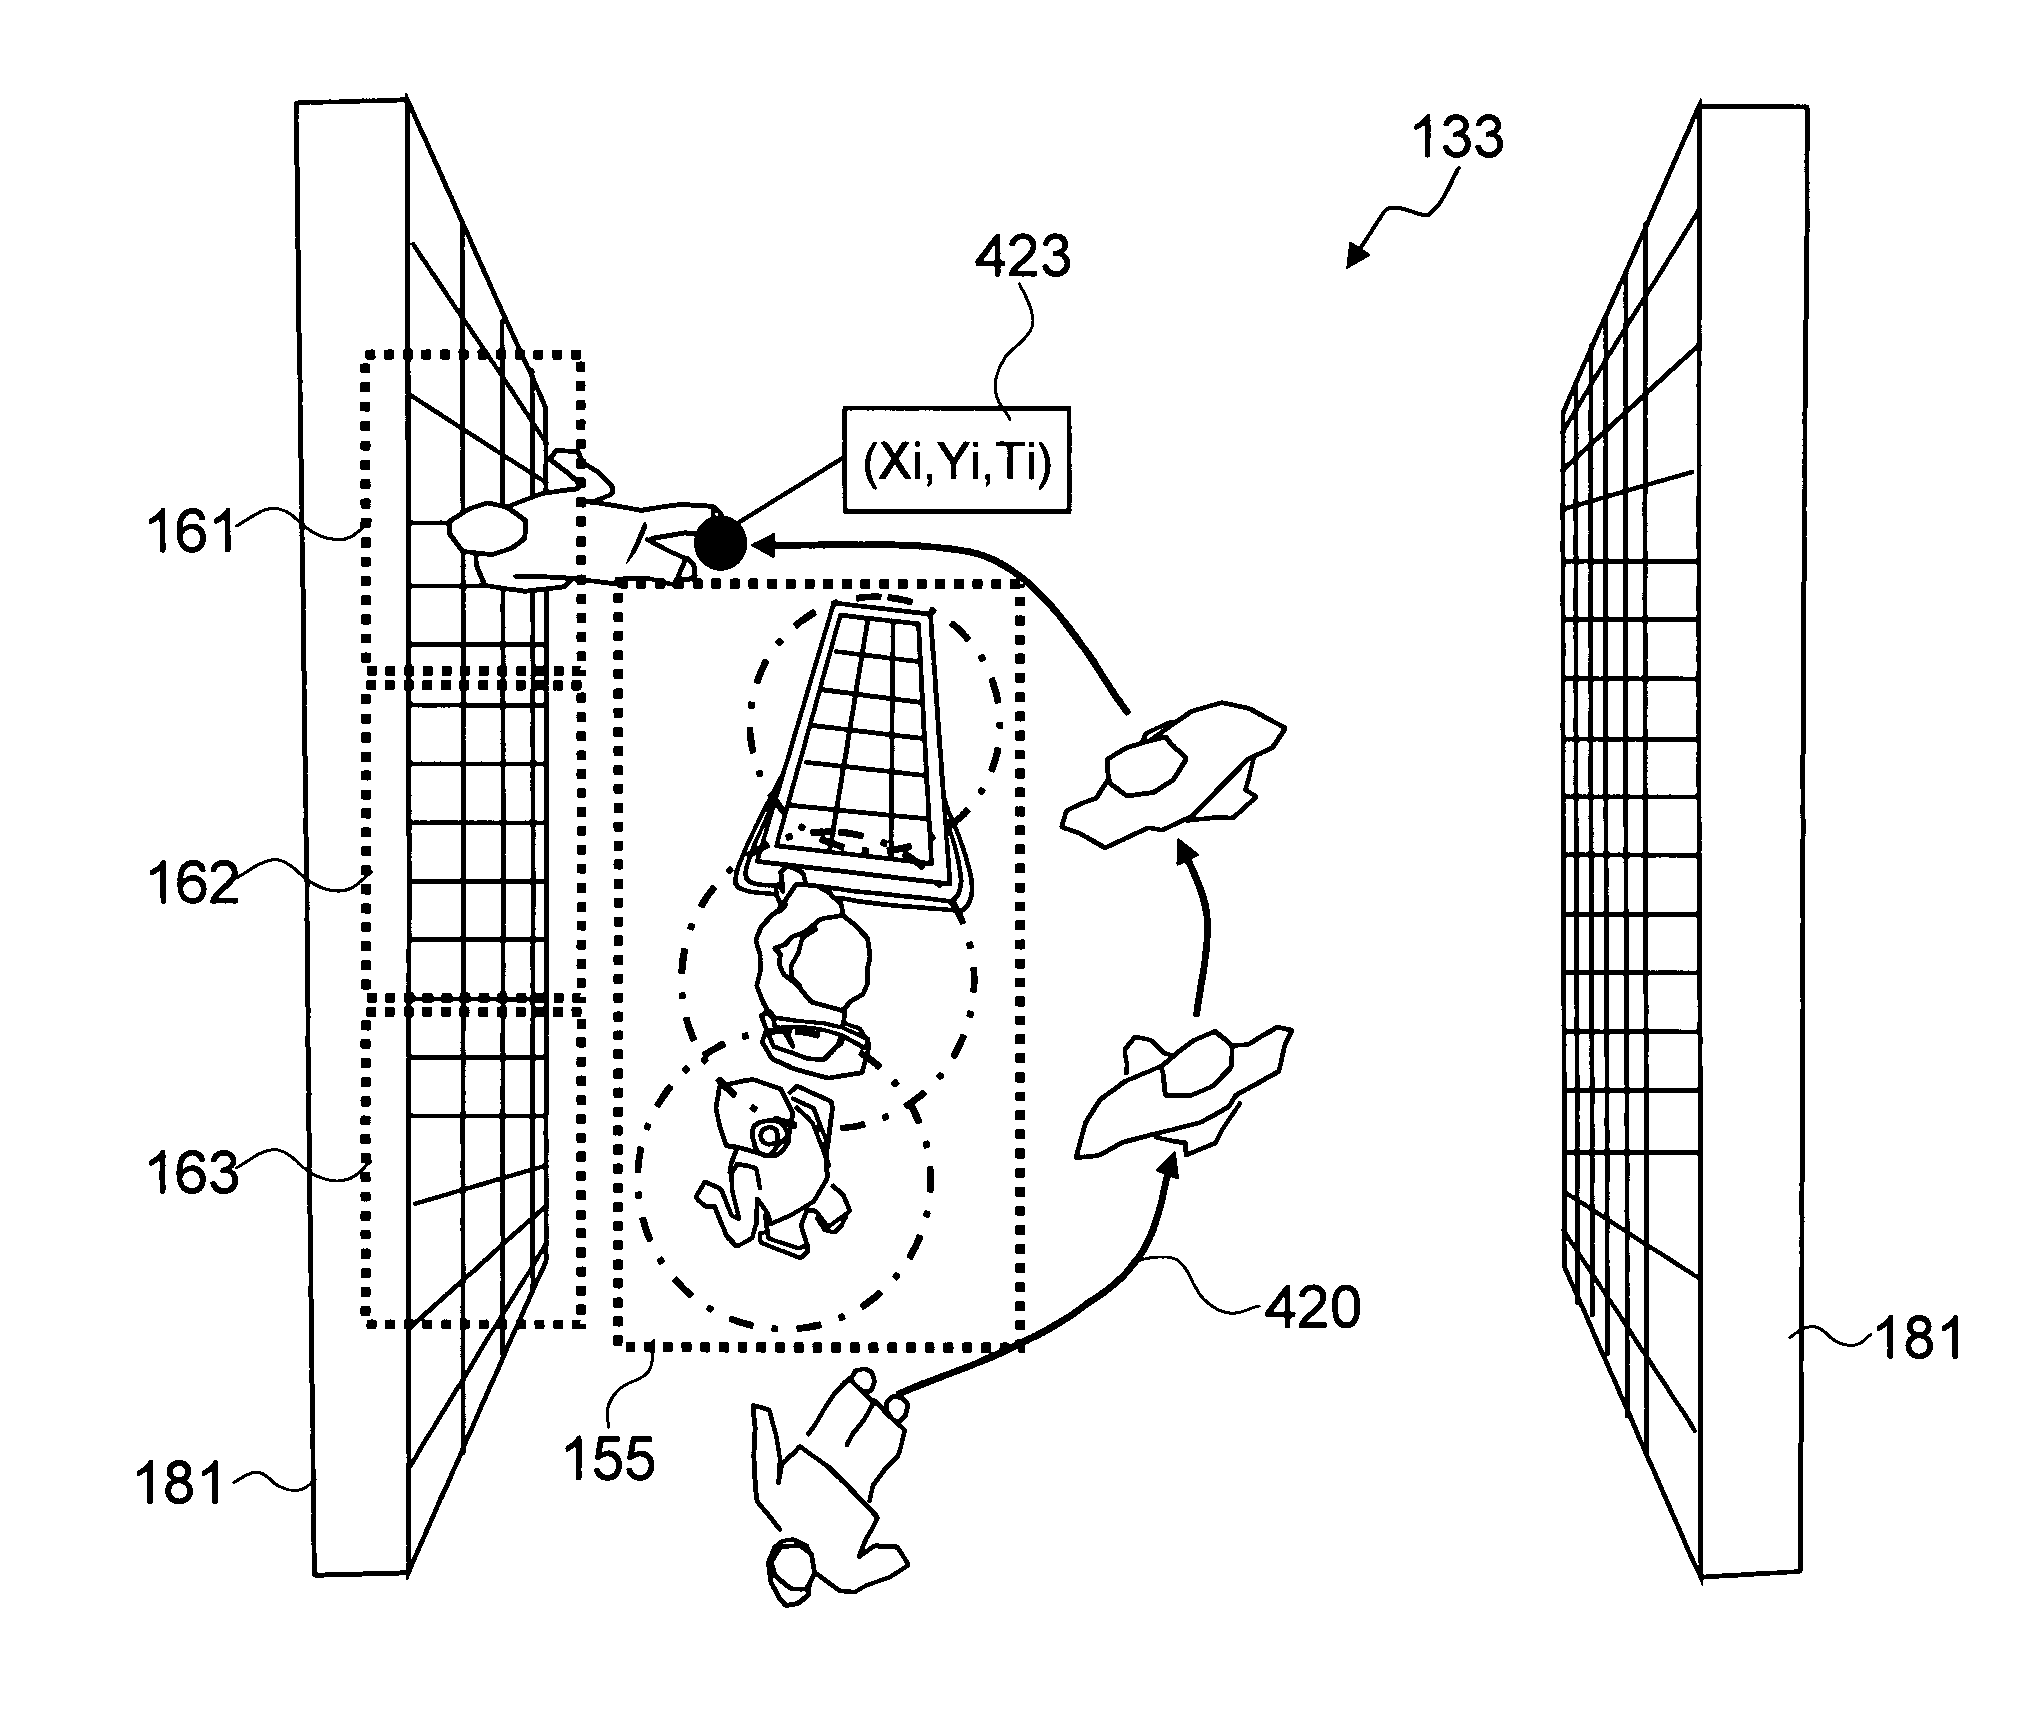 Method and system for determining the impact of crowding on retail performance